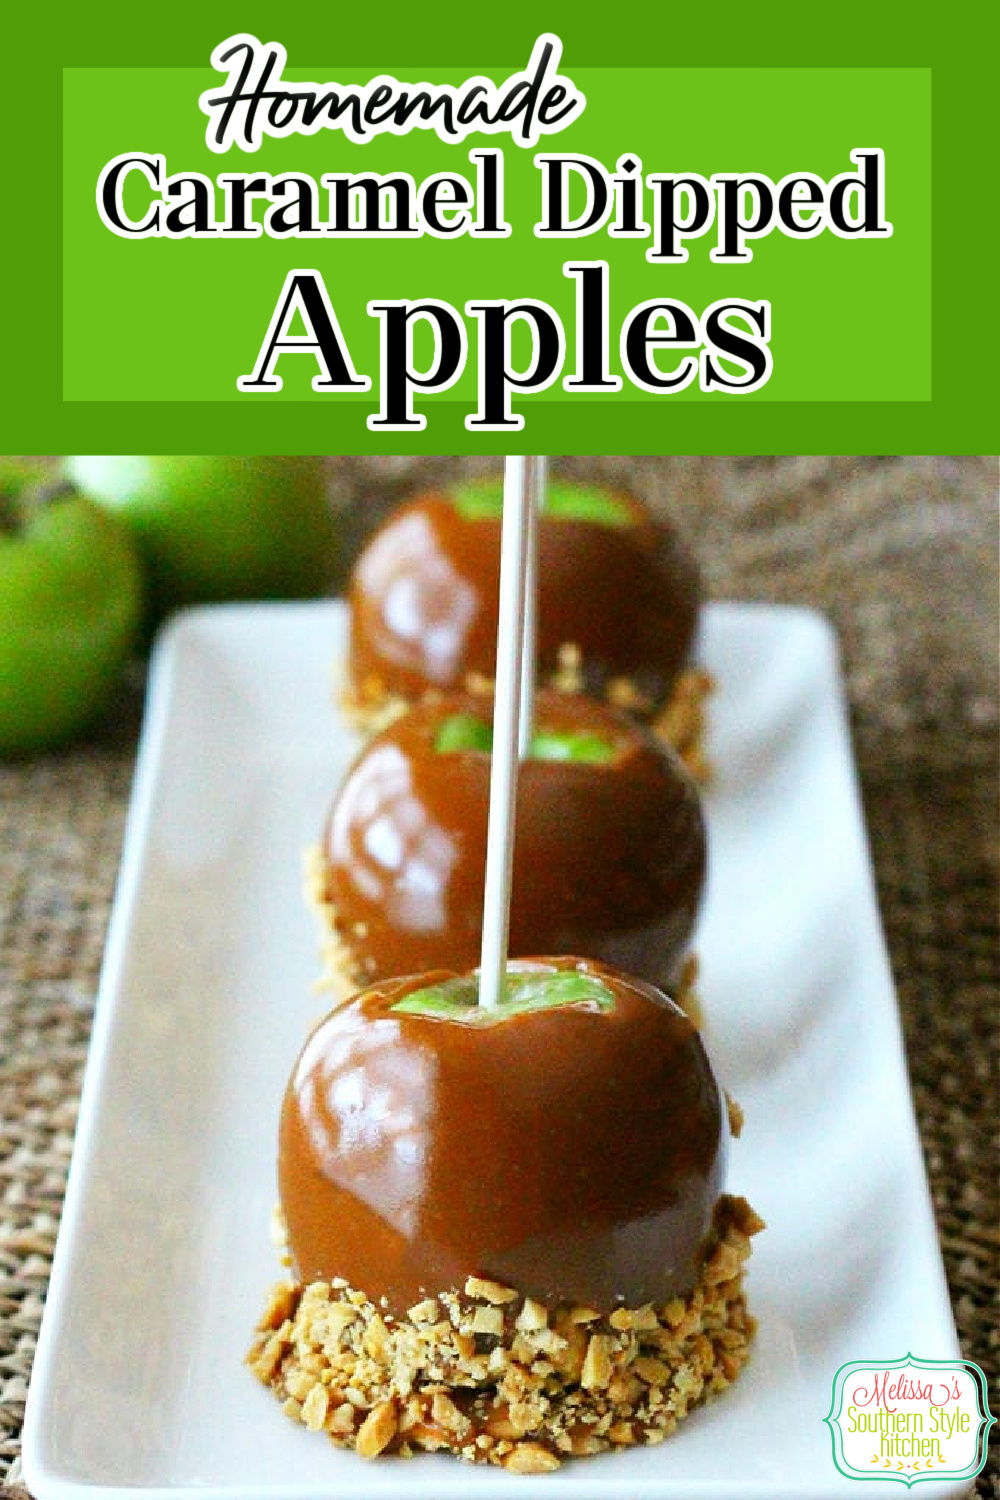 Make your own Caramel Dipped Apples using your favorite variety of apples into this buttery homemade caramel then roll them in nuts, candy, pretzels and more #carameldippedapples #caramelapples #homemadecaramel #apples #candyapples #halloween #fall #desserts #dessertfoodrecipes #southernfood #southernrecipes